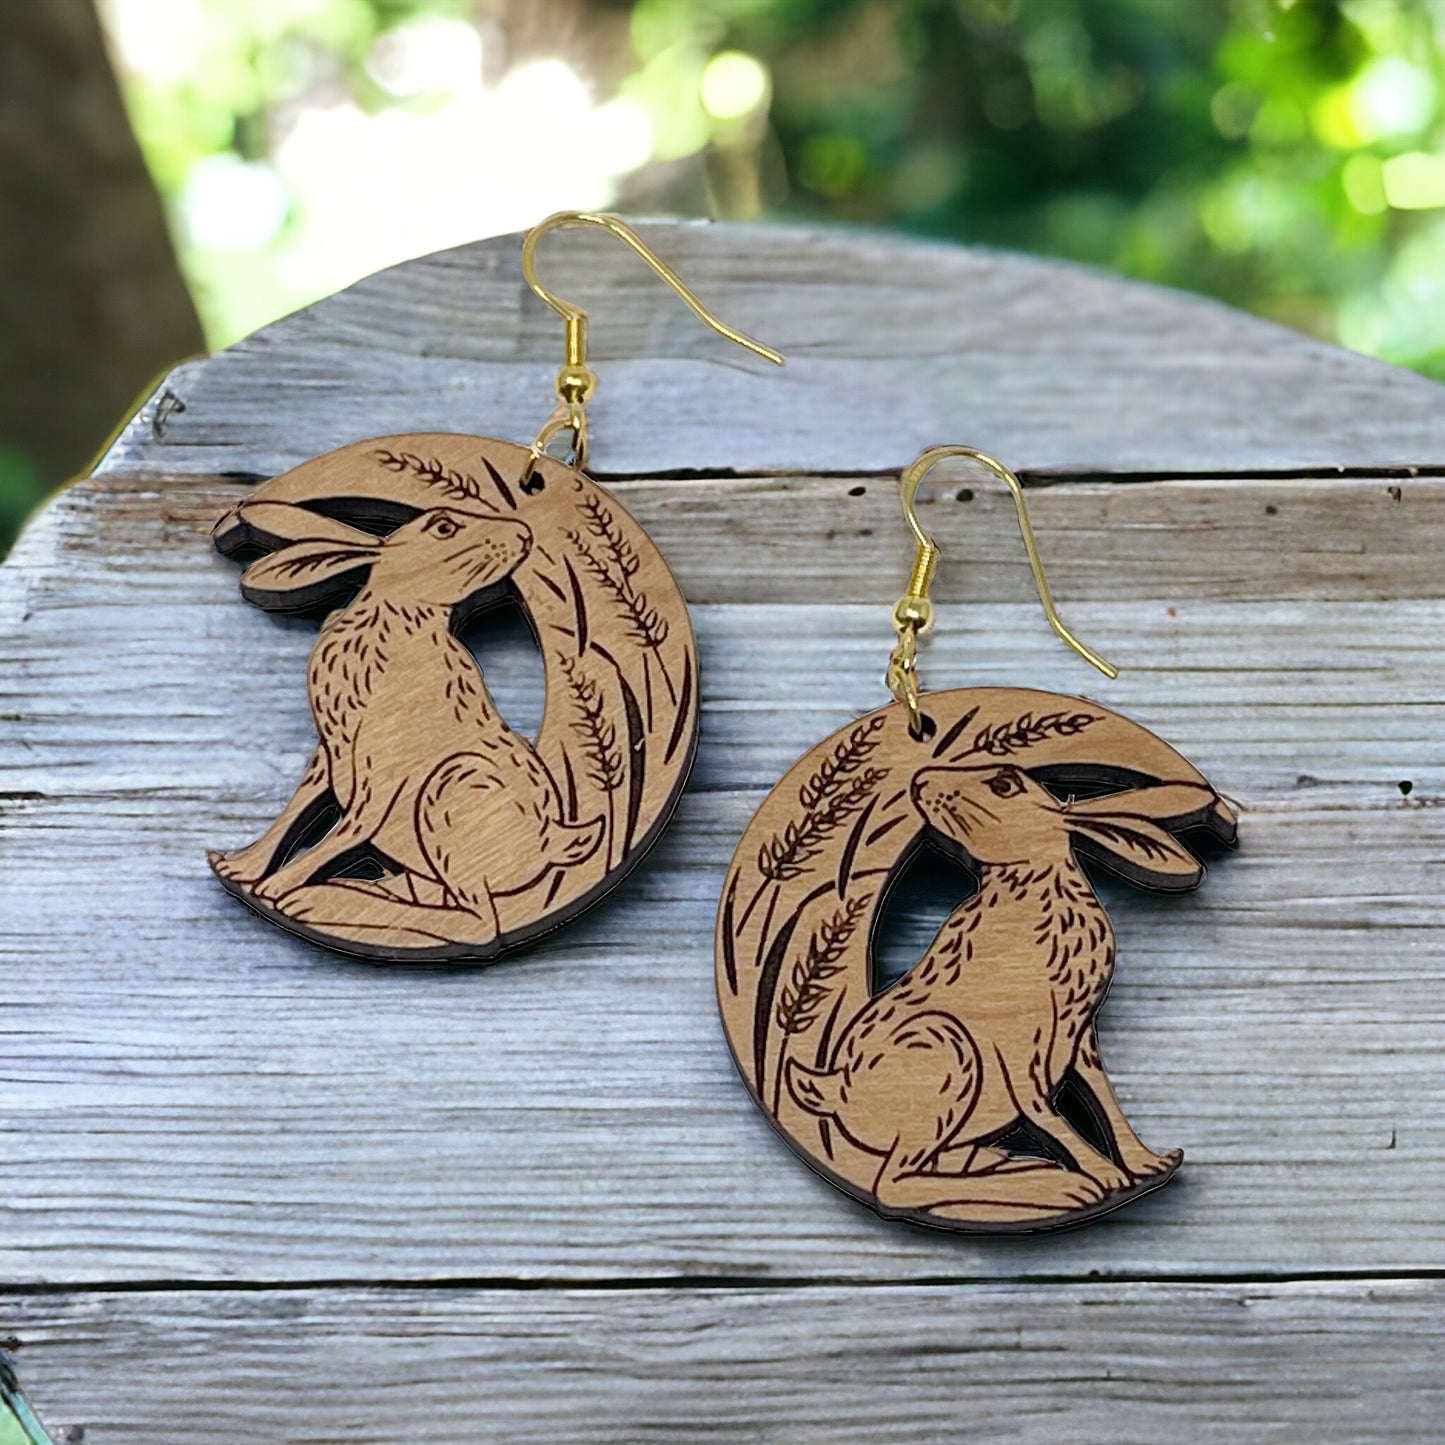 Wooden Bunny Earrings with Crescent Moon & Wheat Design - Whimsical and Nature-Inspired Accessories